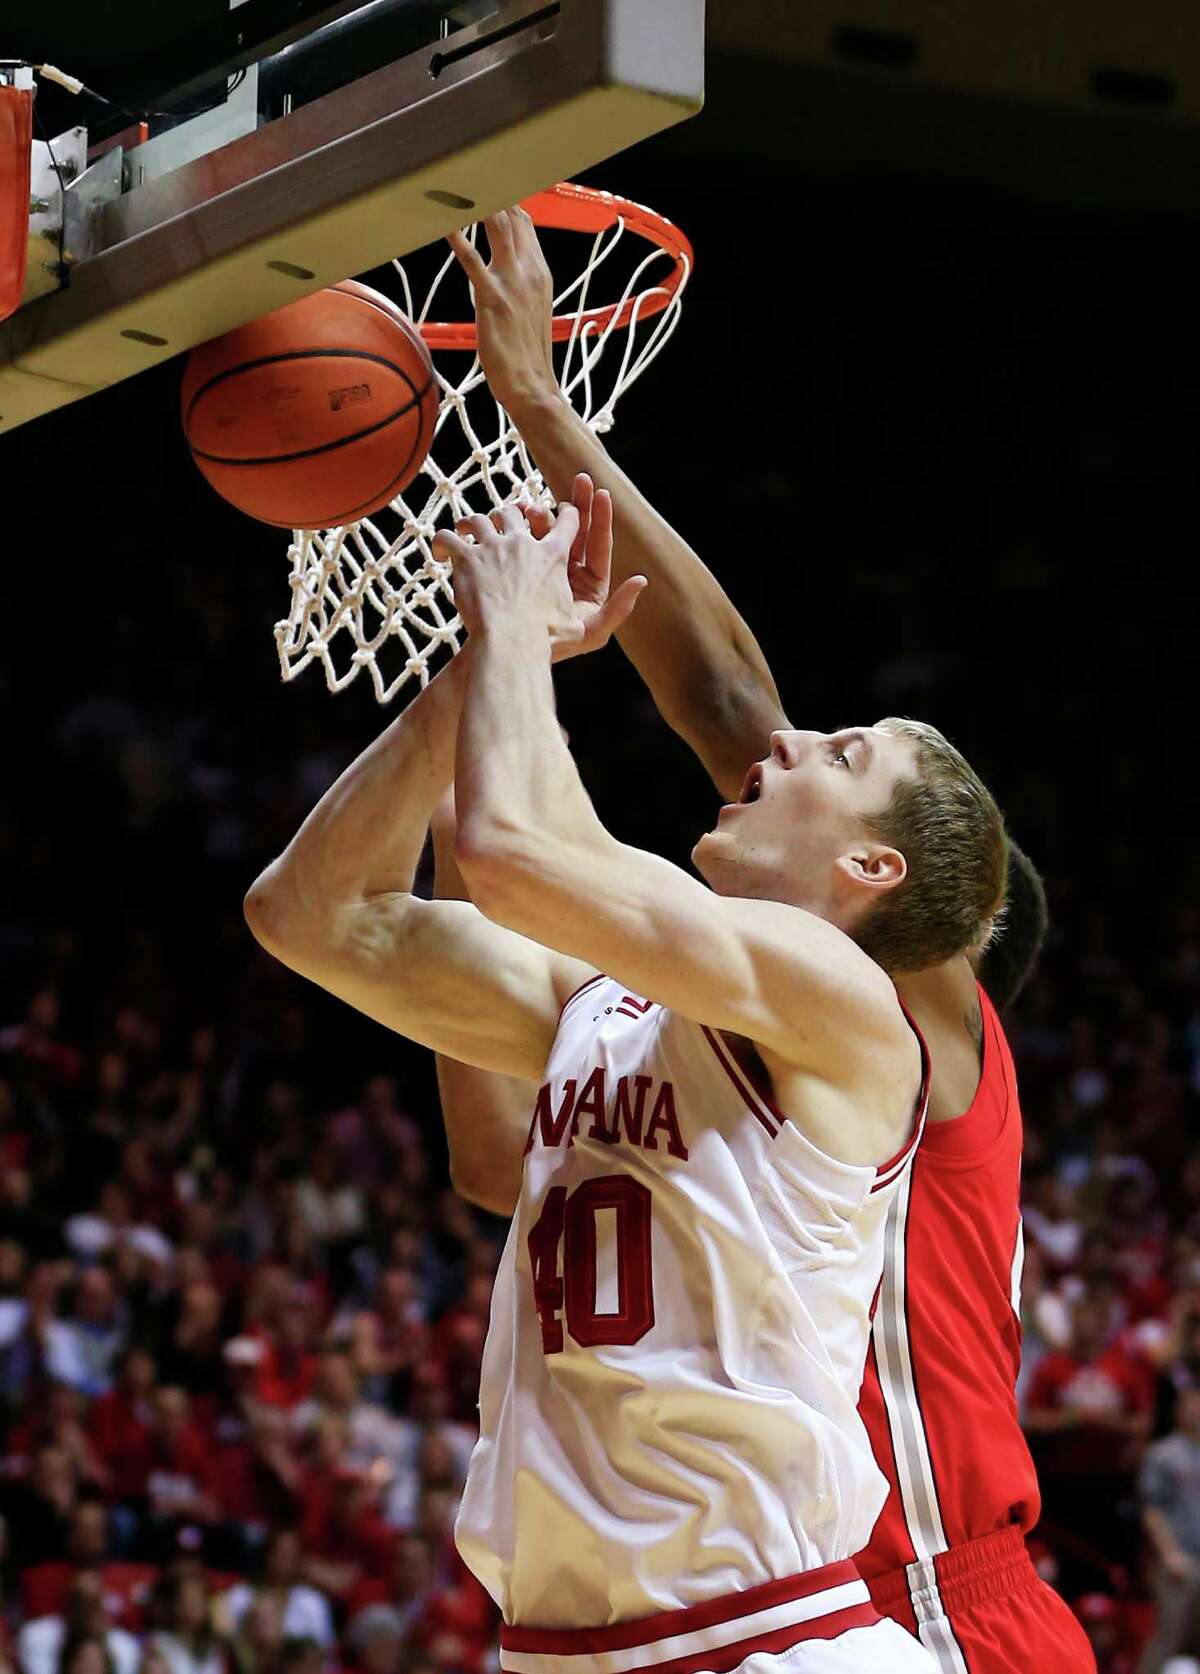 Indiana's Cody Zeller (40) goes up to grab a rebound during the first half of an NCAA college basketball game against Ohio State, Tuesday, March 5, 2013, in Bloomington, Ind. (AP Photo/Darron Cummings)